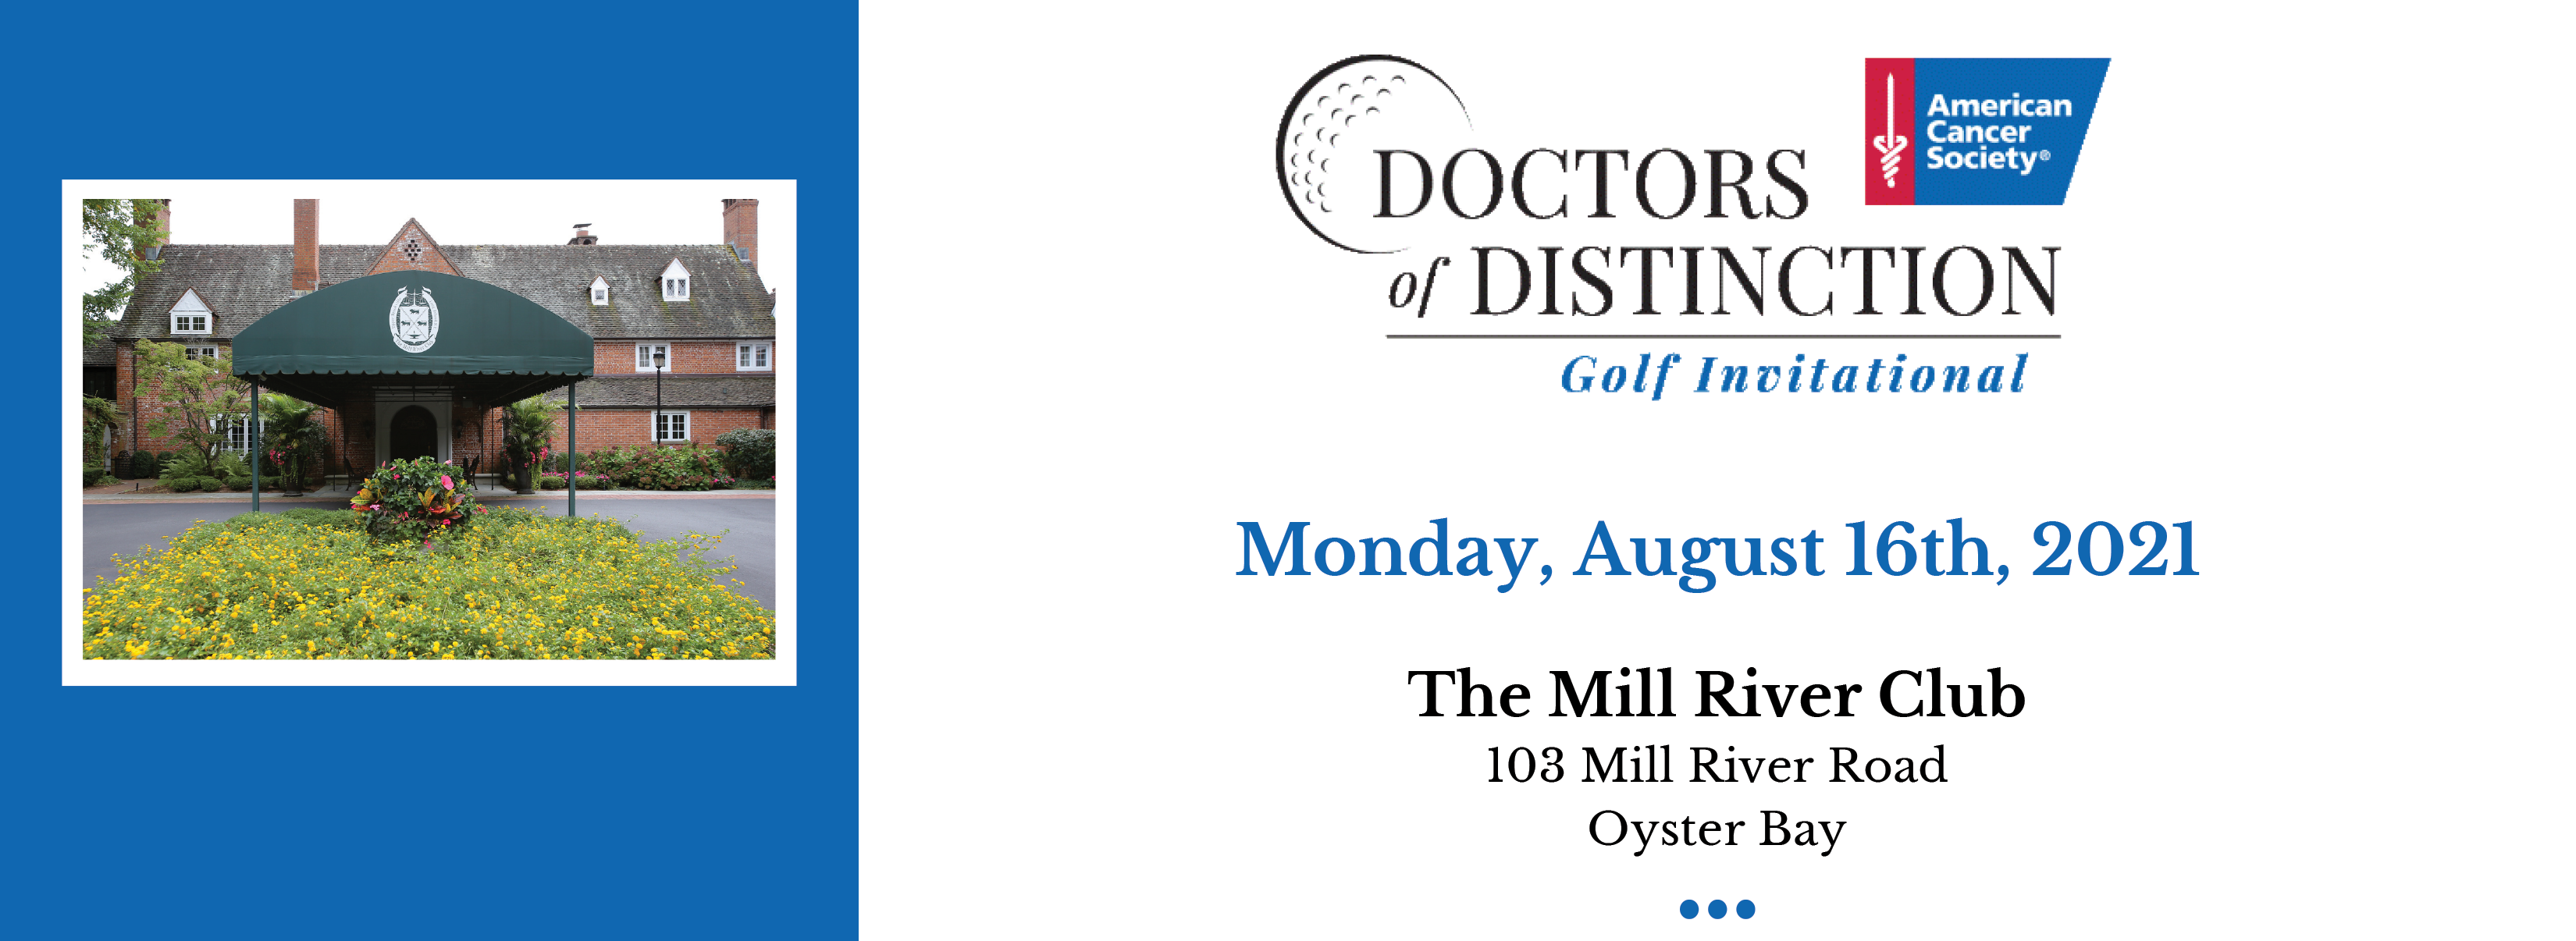 2021 DOD header image. Blue side square image of Mill River Club and the Doctors of Distinction logo with event details: Monday, August 16th, 2021 To secure your foursome, purchase a journal ad or tee sign, or for more information please visit: D octorsofDistinctionGolf.org The Mill River Club 103 Mill River Road Oyster Bay